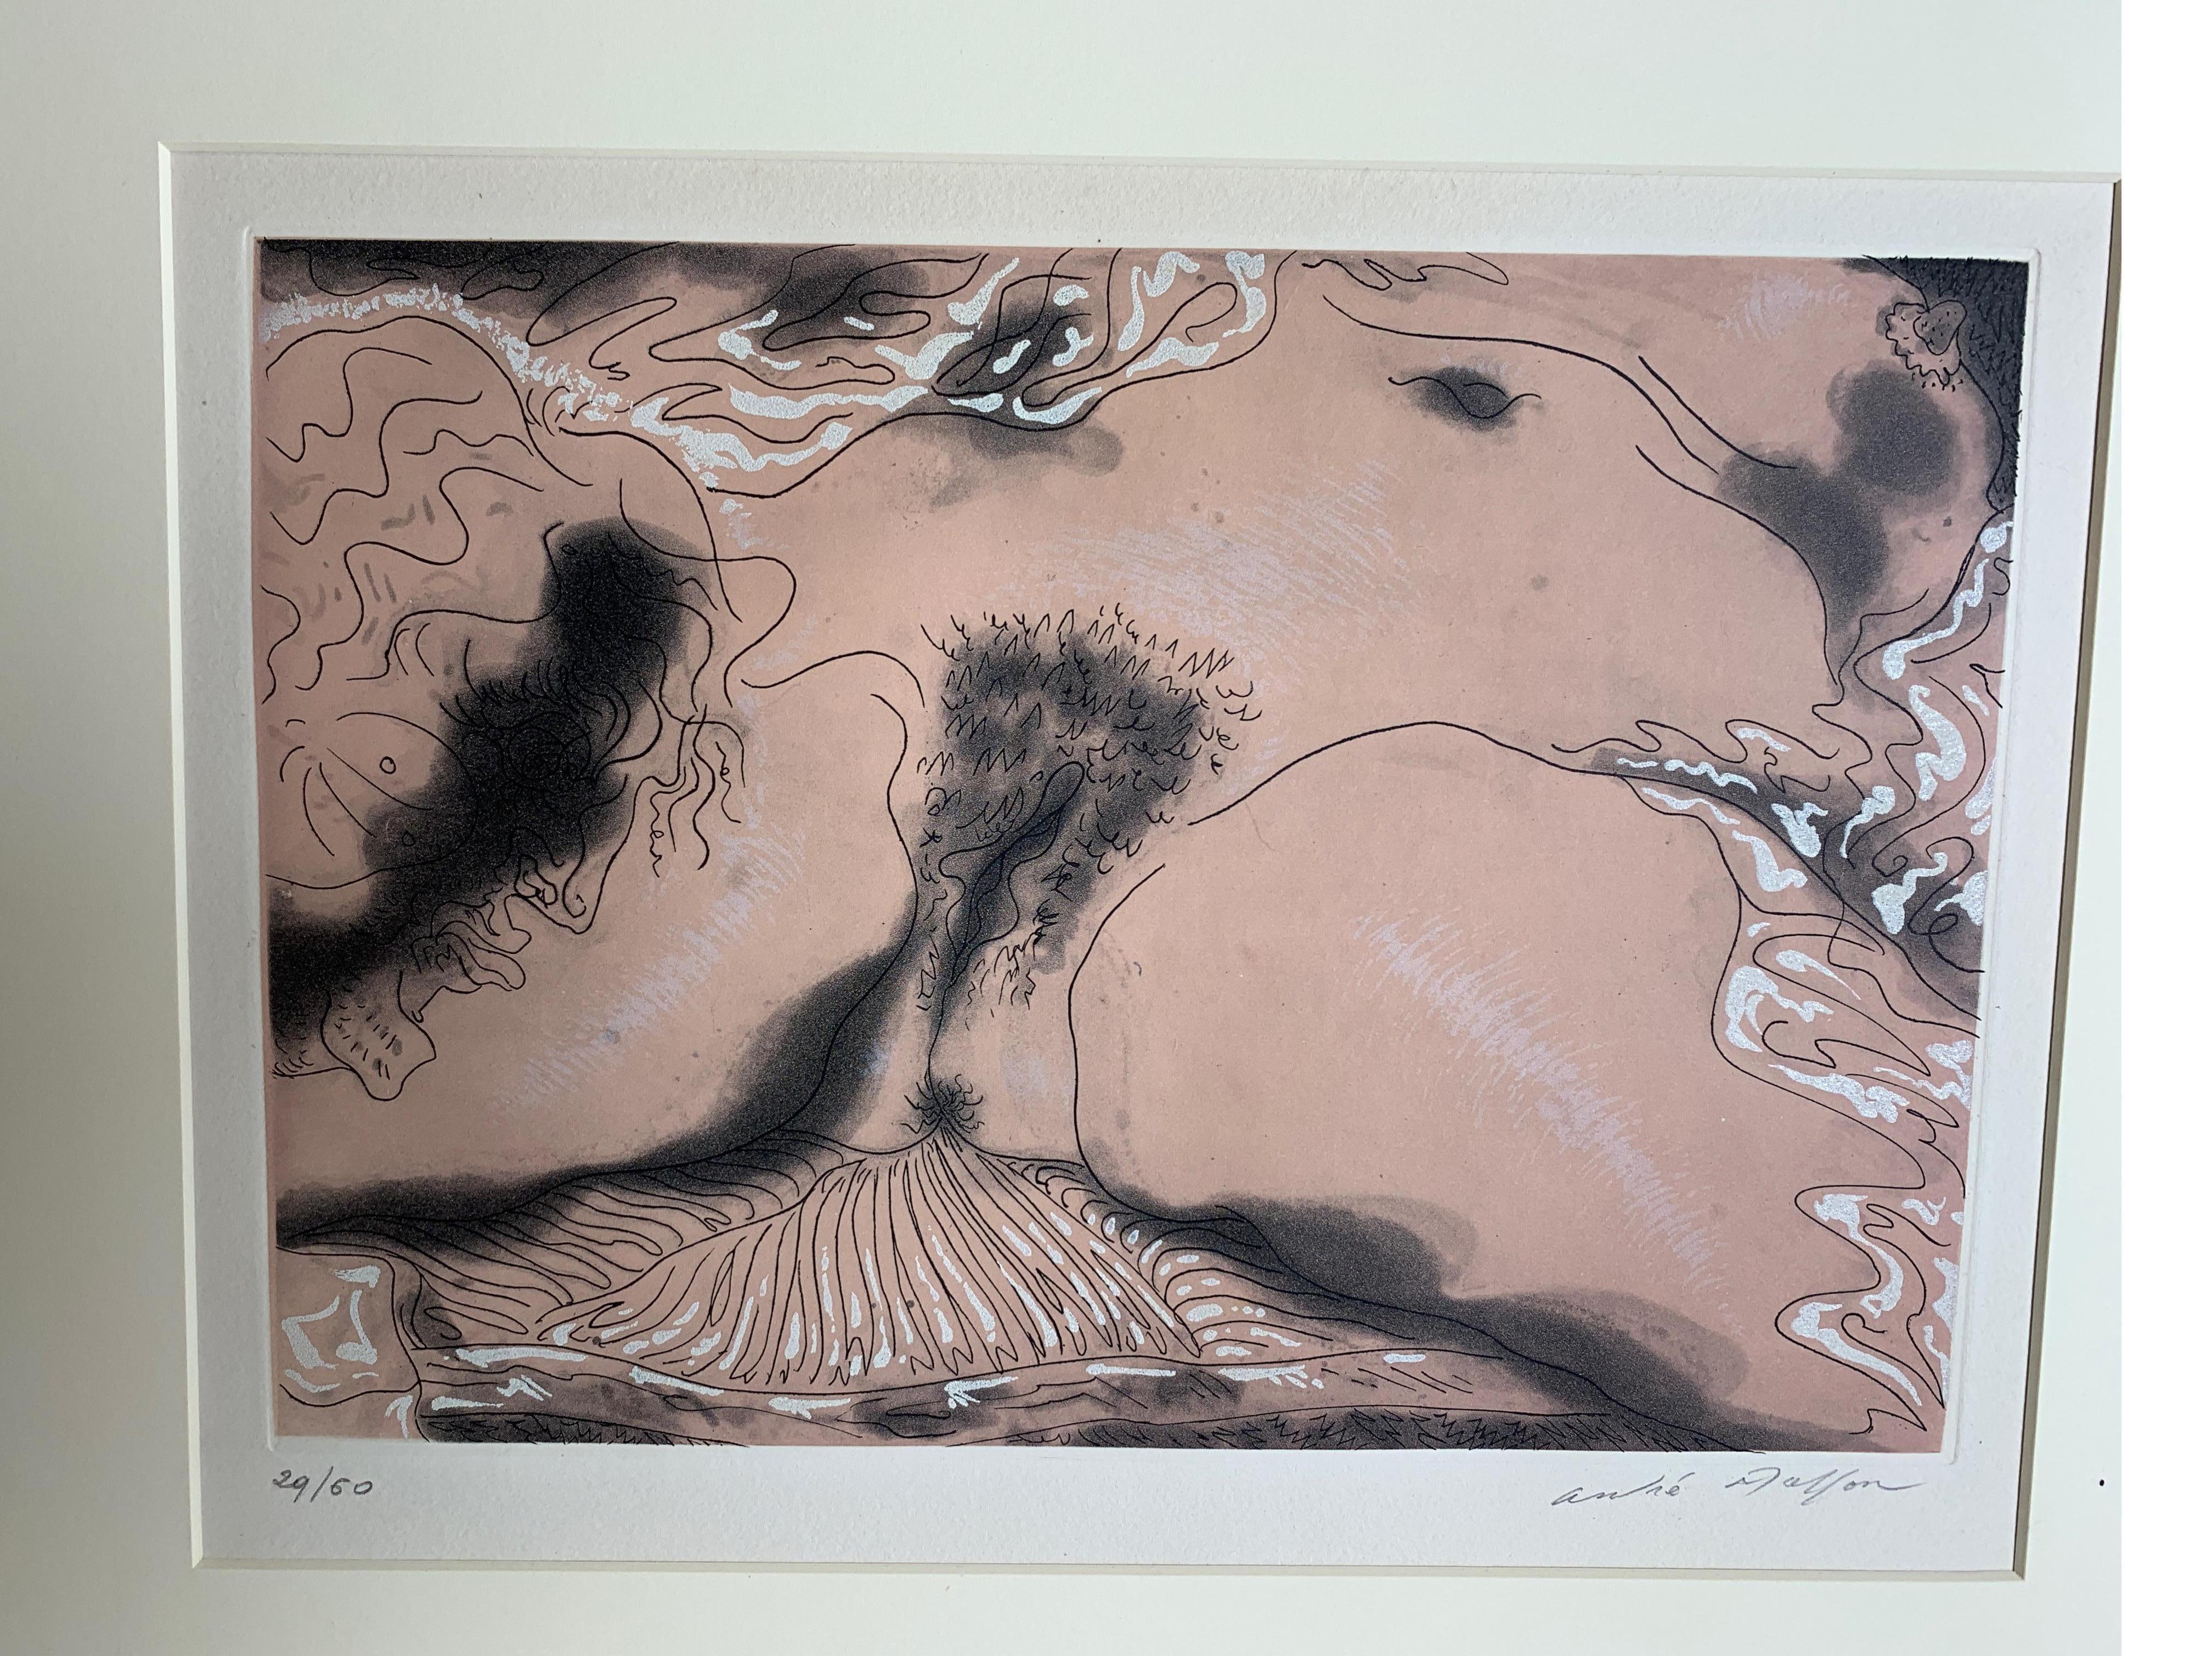 20th Century Series of Nine Surrealist Erotic Lithographs by Andre Masson, Signed / Numbered